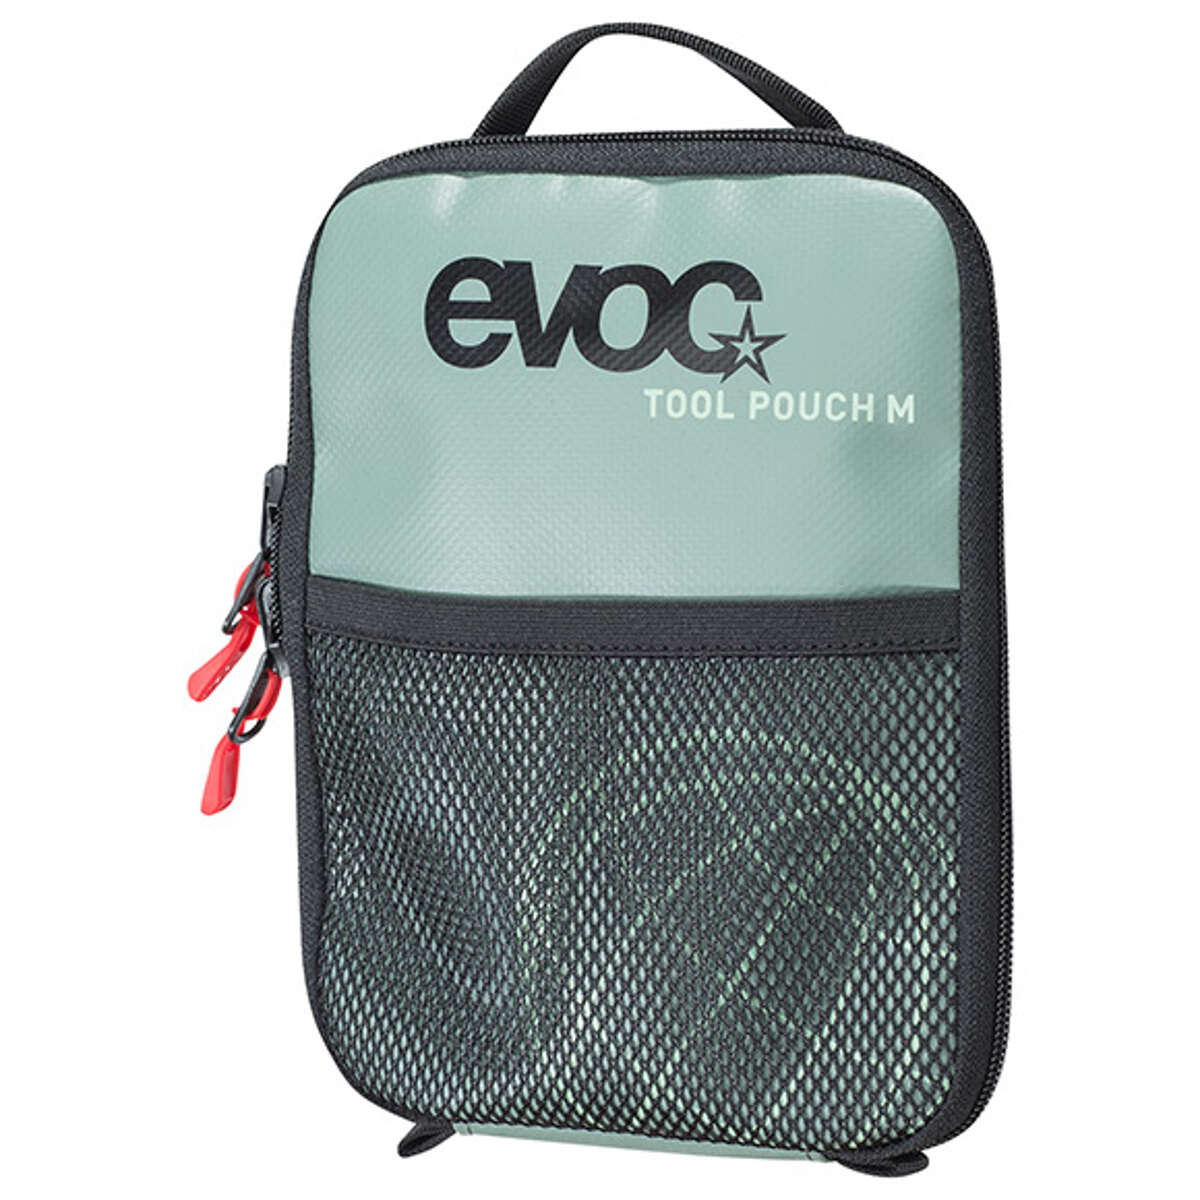 Evoc Sac à Outils Tool Pouch 0.6L - Olive